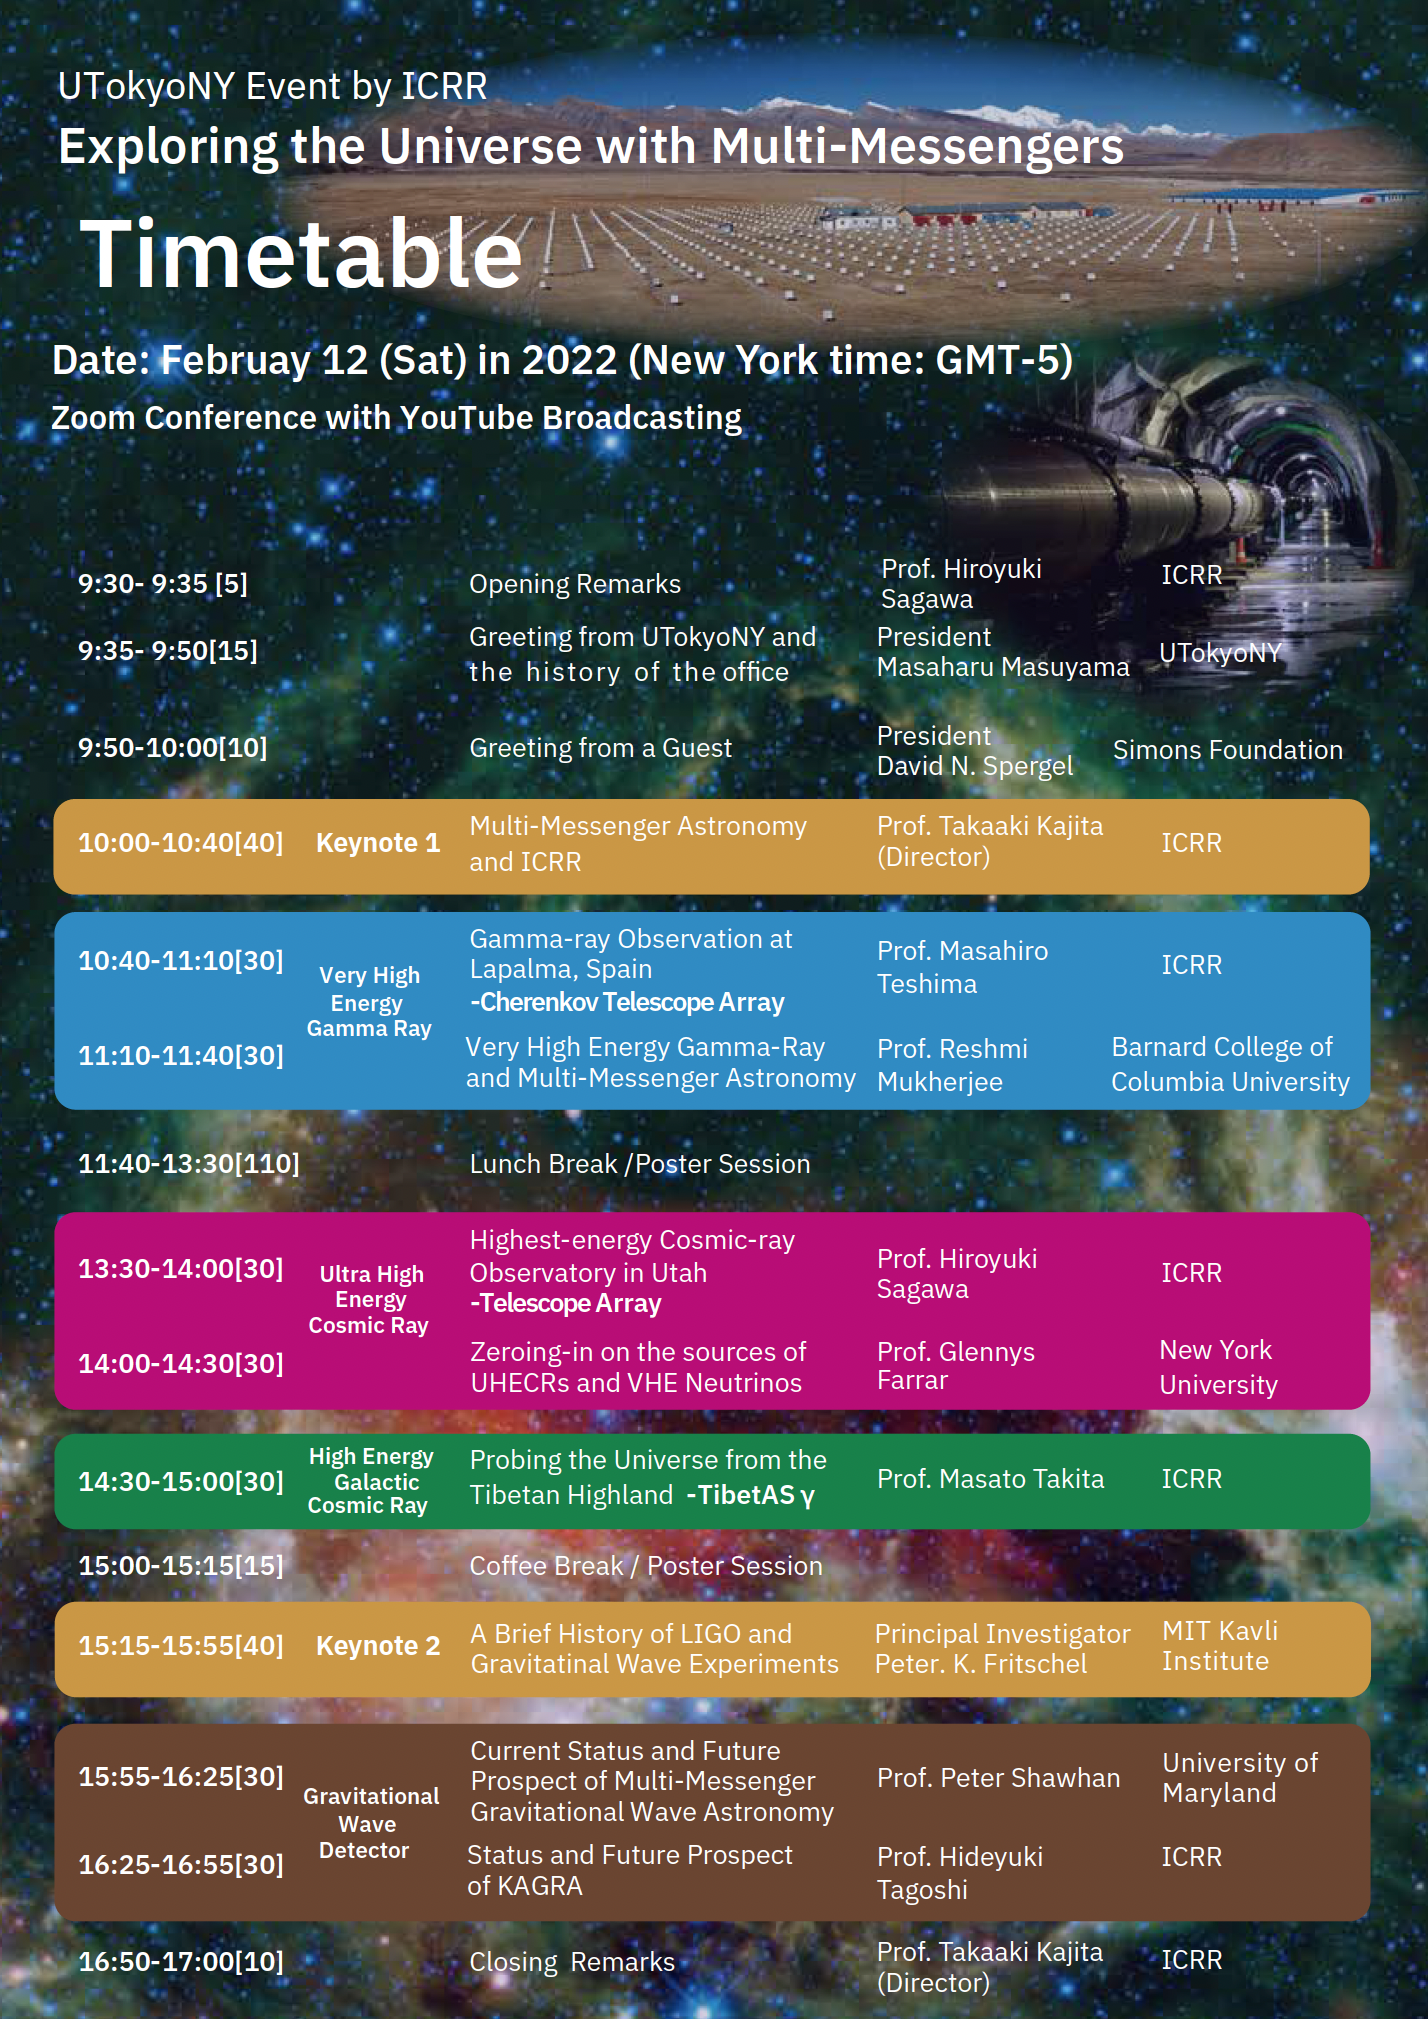 【February 12, 2022】Symposium “Exploring the Universe with Multi-Messengers”